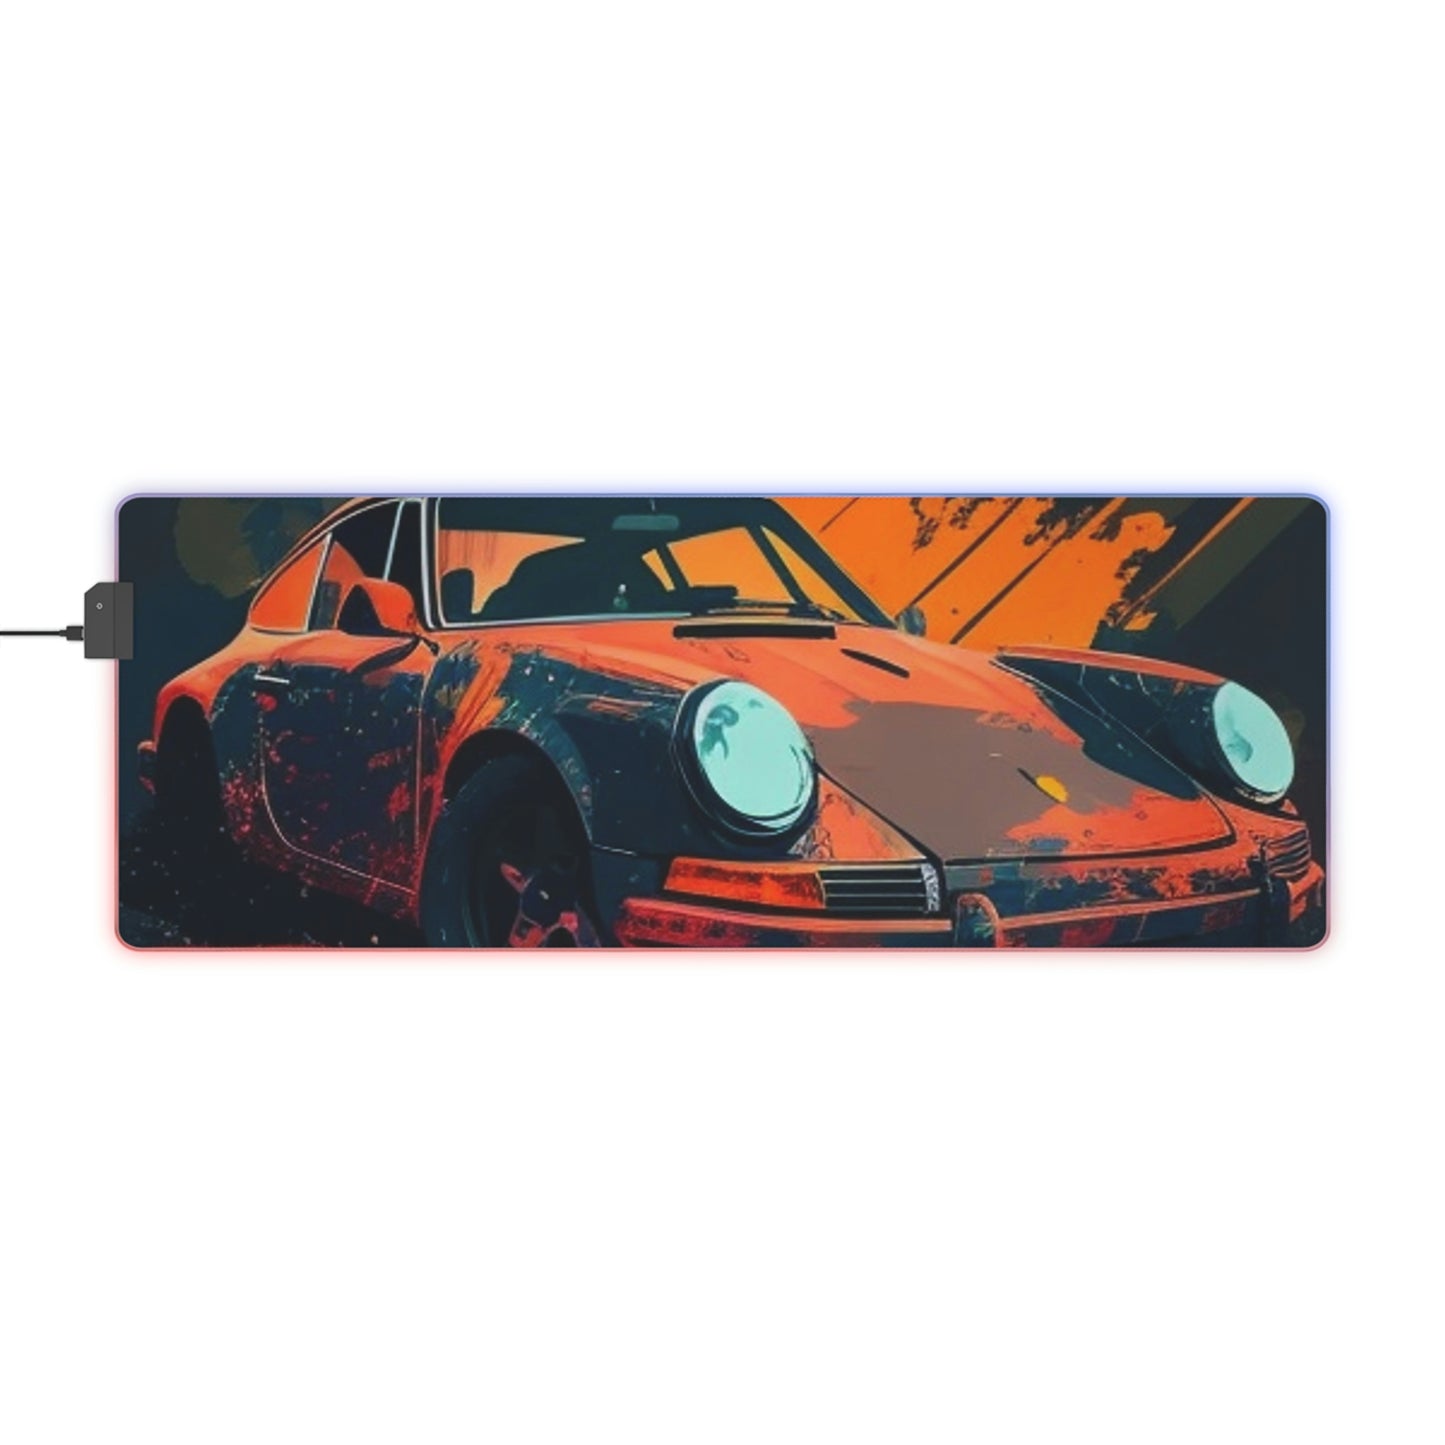 LED Gaming Mouse Pad Porsche Abstract 3